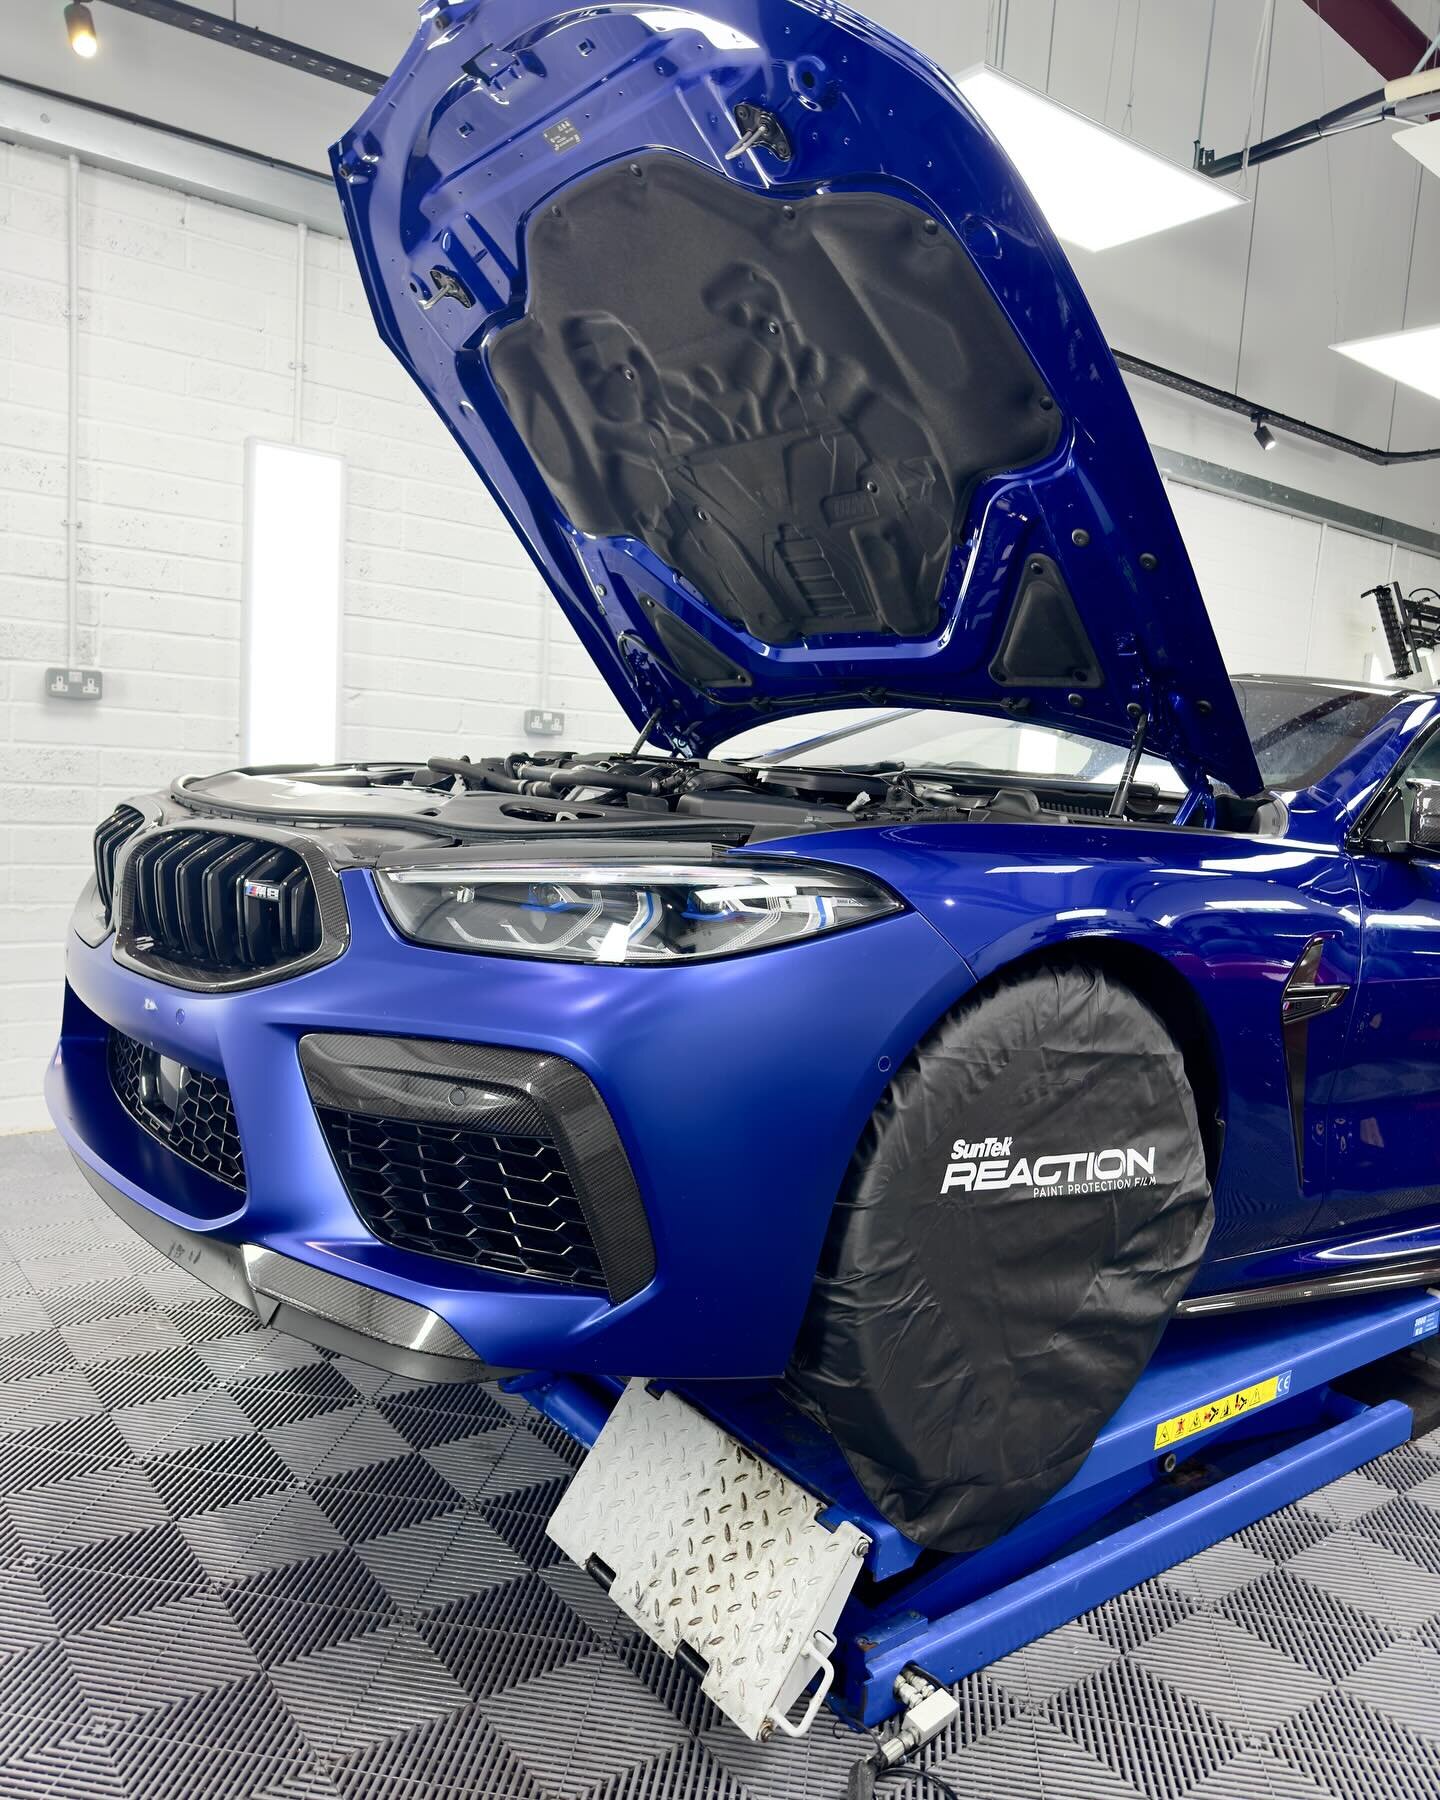 BMW M8 Competition undergoing a stealth conversion. The glossy marina bay blue paintwork being converted to a matte finish by installing Suntek matte PPF over the gloss paintwork. Templates edited and enhanced to ensure we achieve the maximum amount 